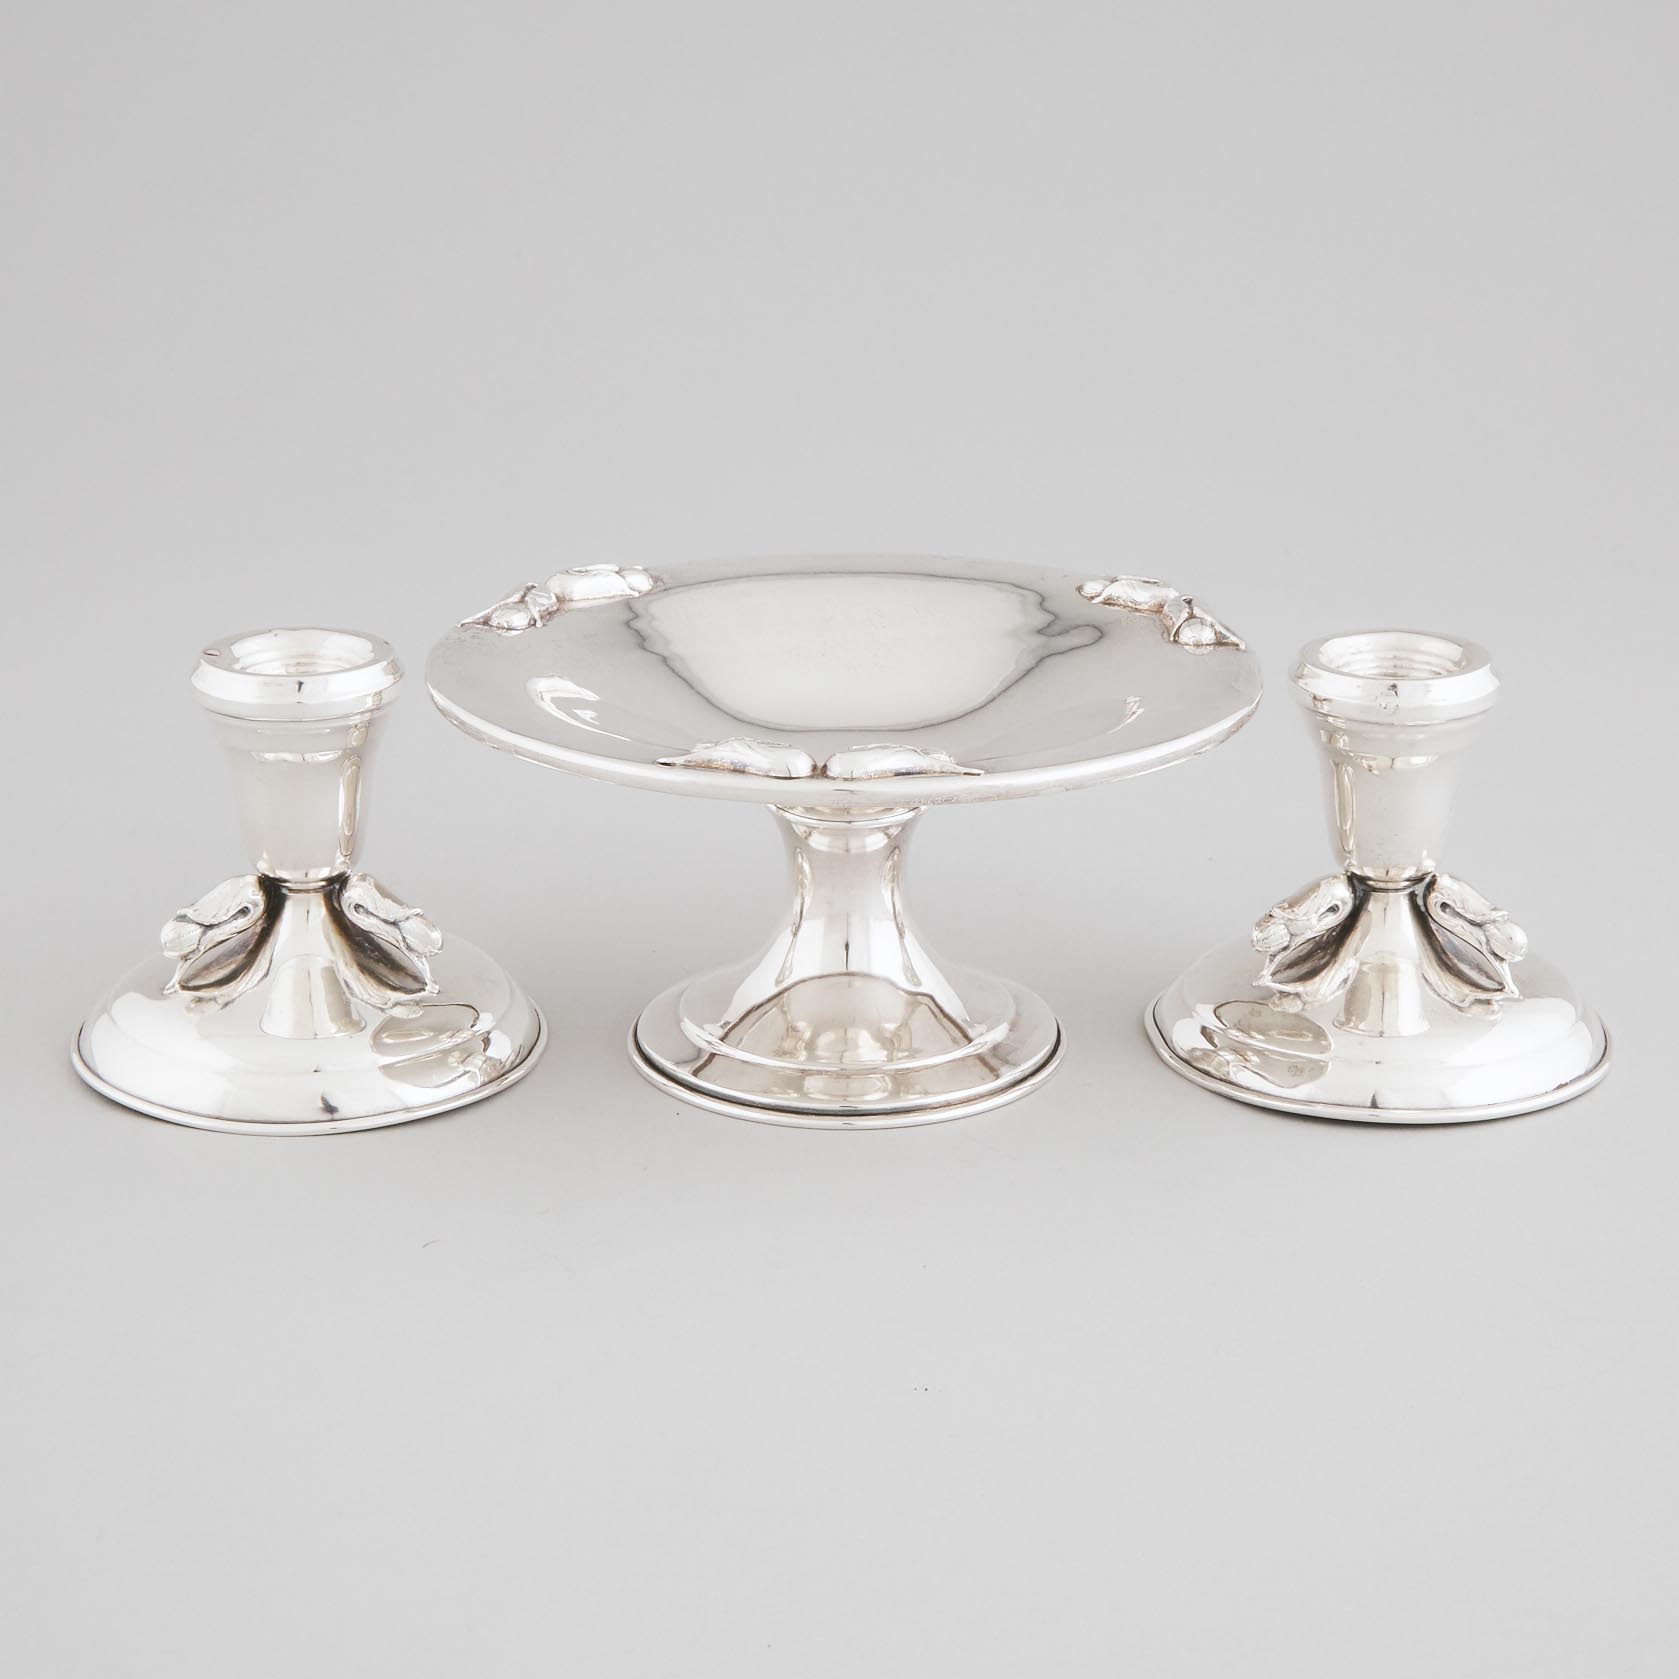 Pair of Canadian Silver Low Candlesticks